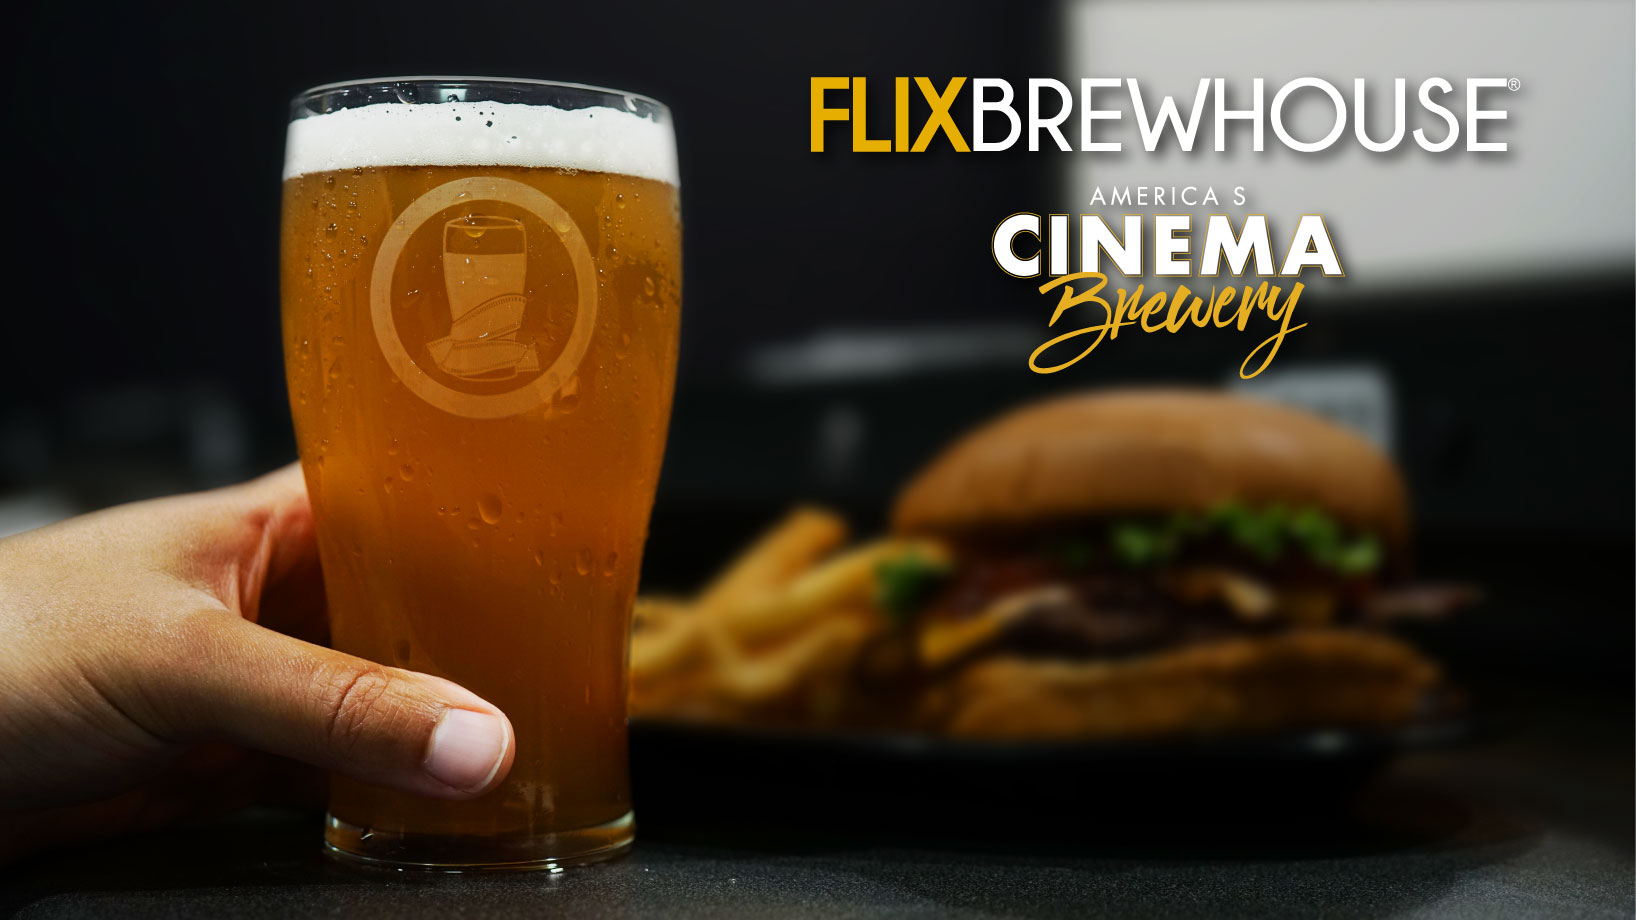 Flix Brewhouse | America’s Cinema Brewery is Expanding